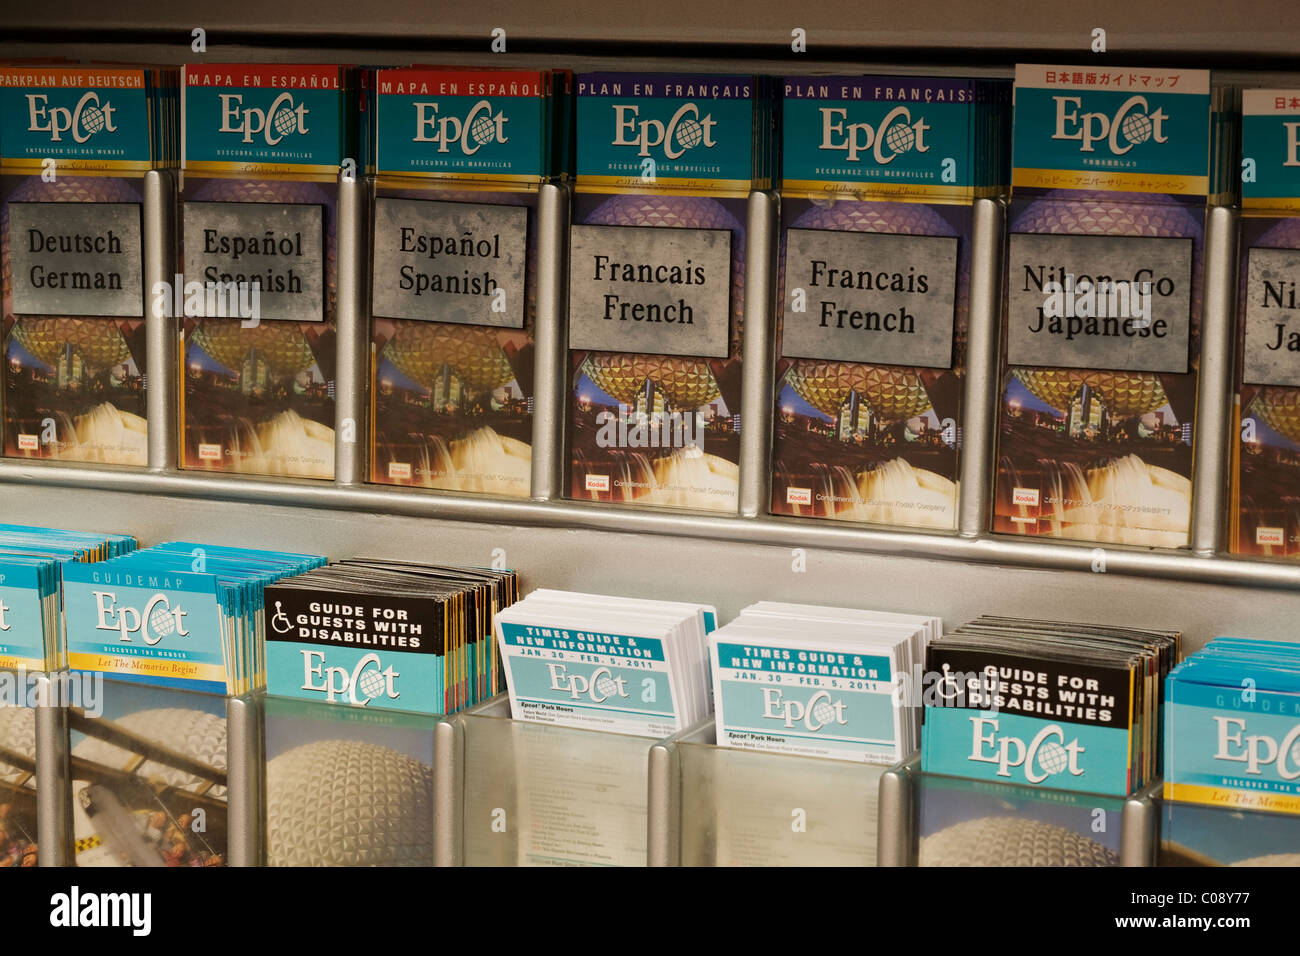 Disney World's Epcot theme park offers brochures in many languages. Stock Photo